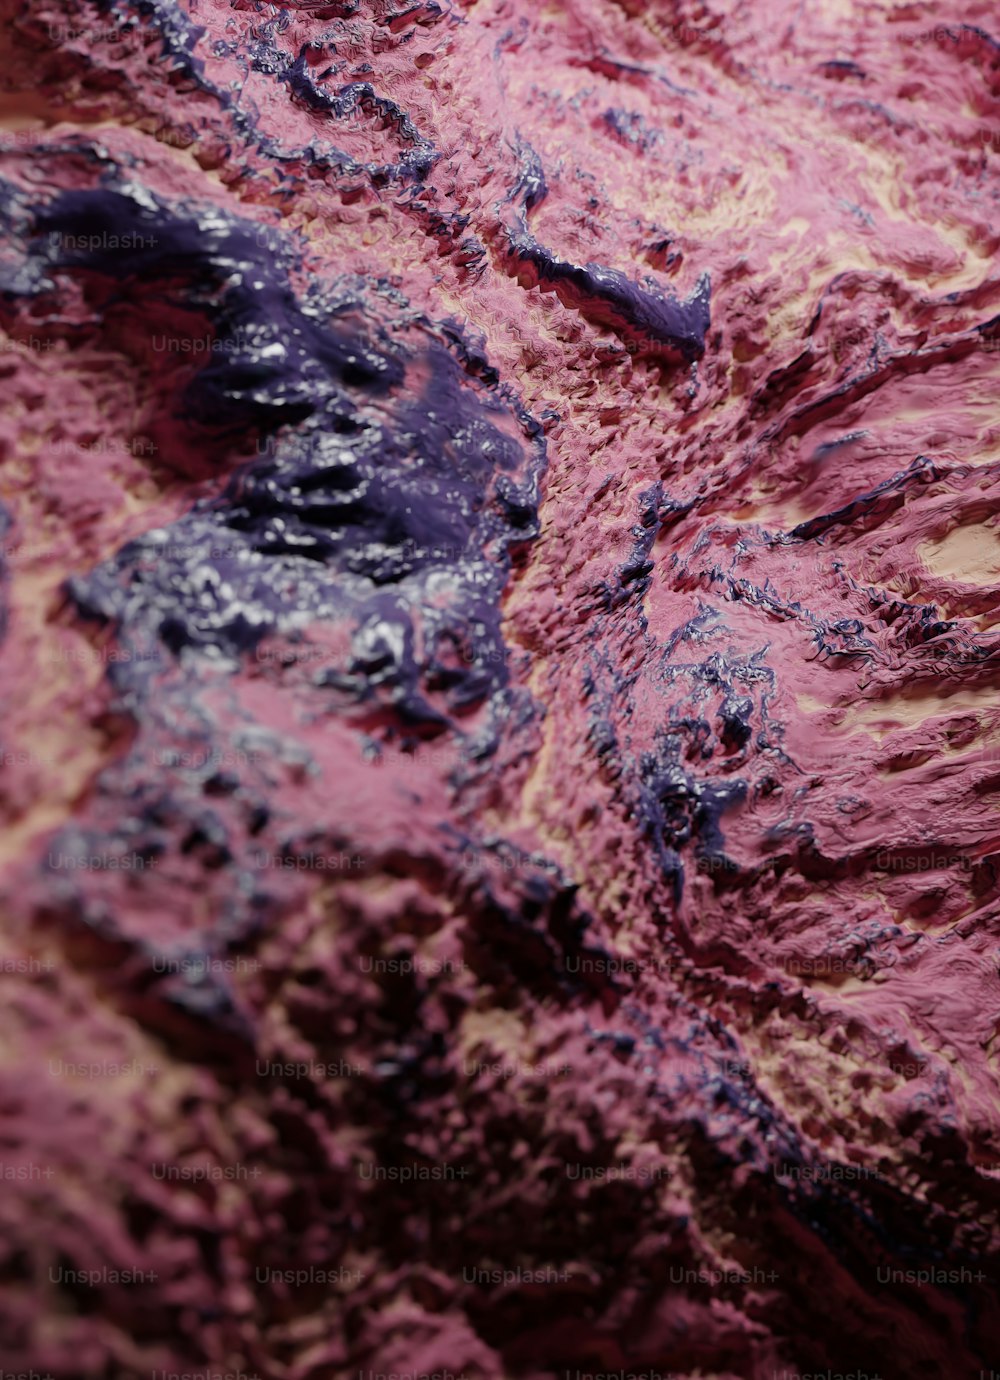 a close up of a rock with a purple substance on it